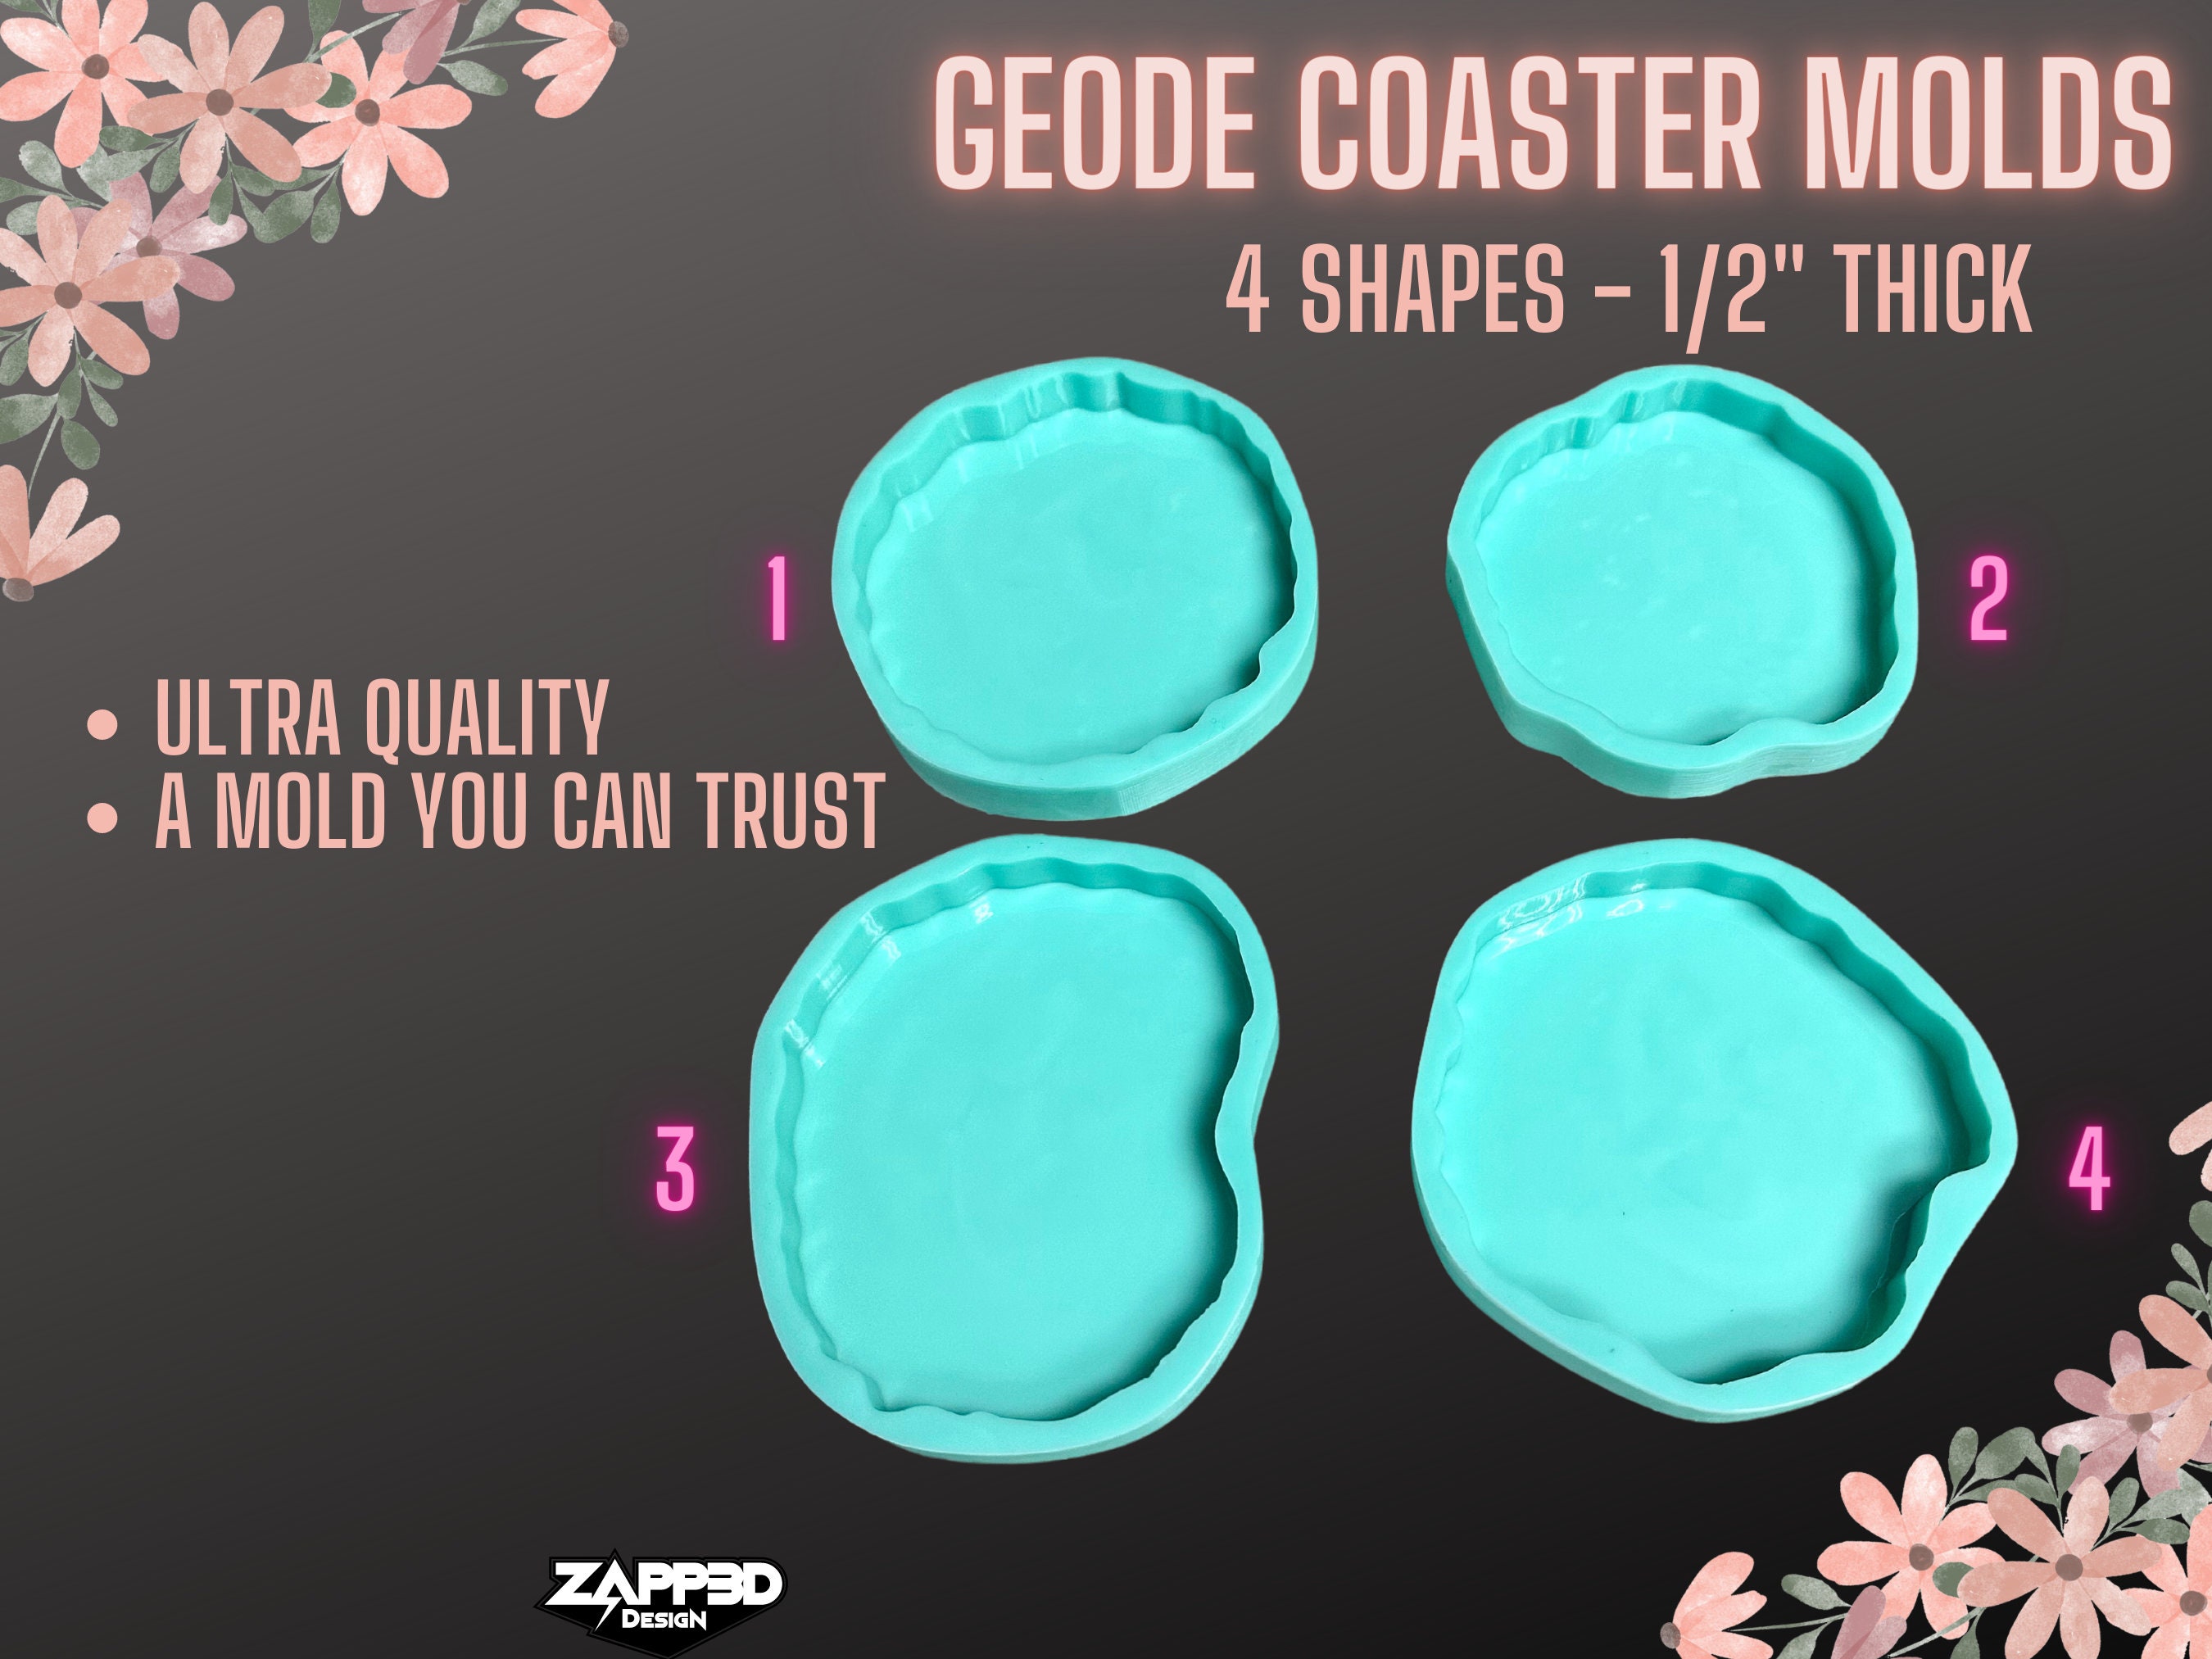 RESINWORLD Silicone Resin Molds, 1 Pcs 10 Inches Large Resin Tray Mold + 4 Pack 5 Inches Geode Agate Coaster Molds, Geode Tray Molds, Tray and Coaster